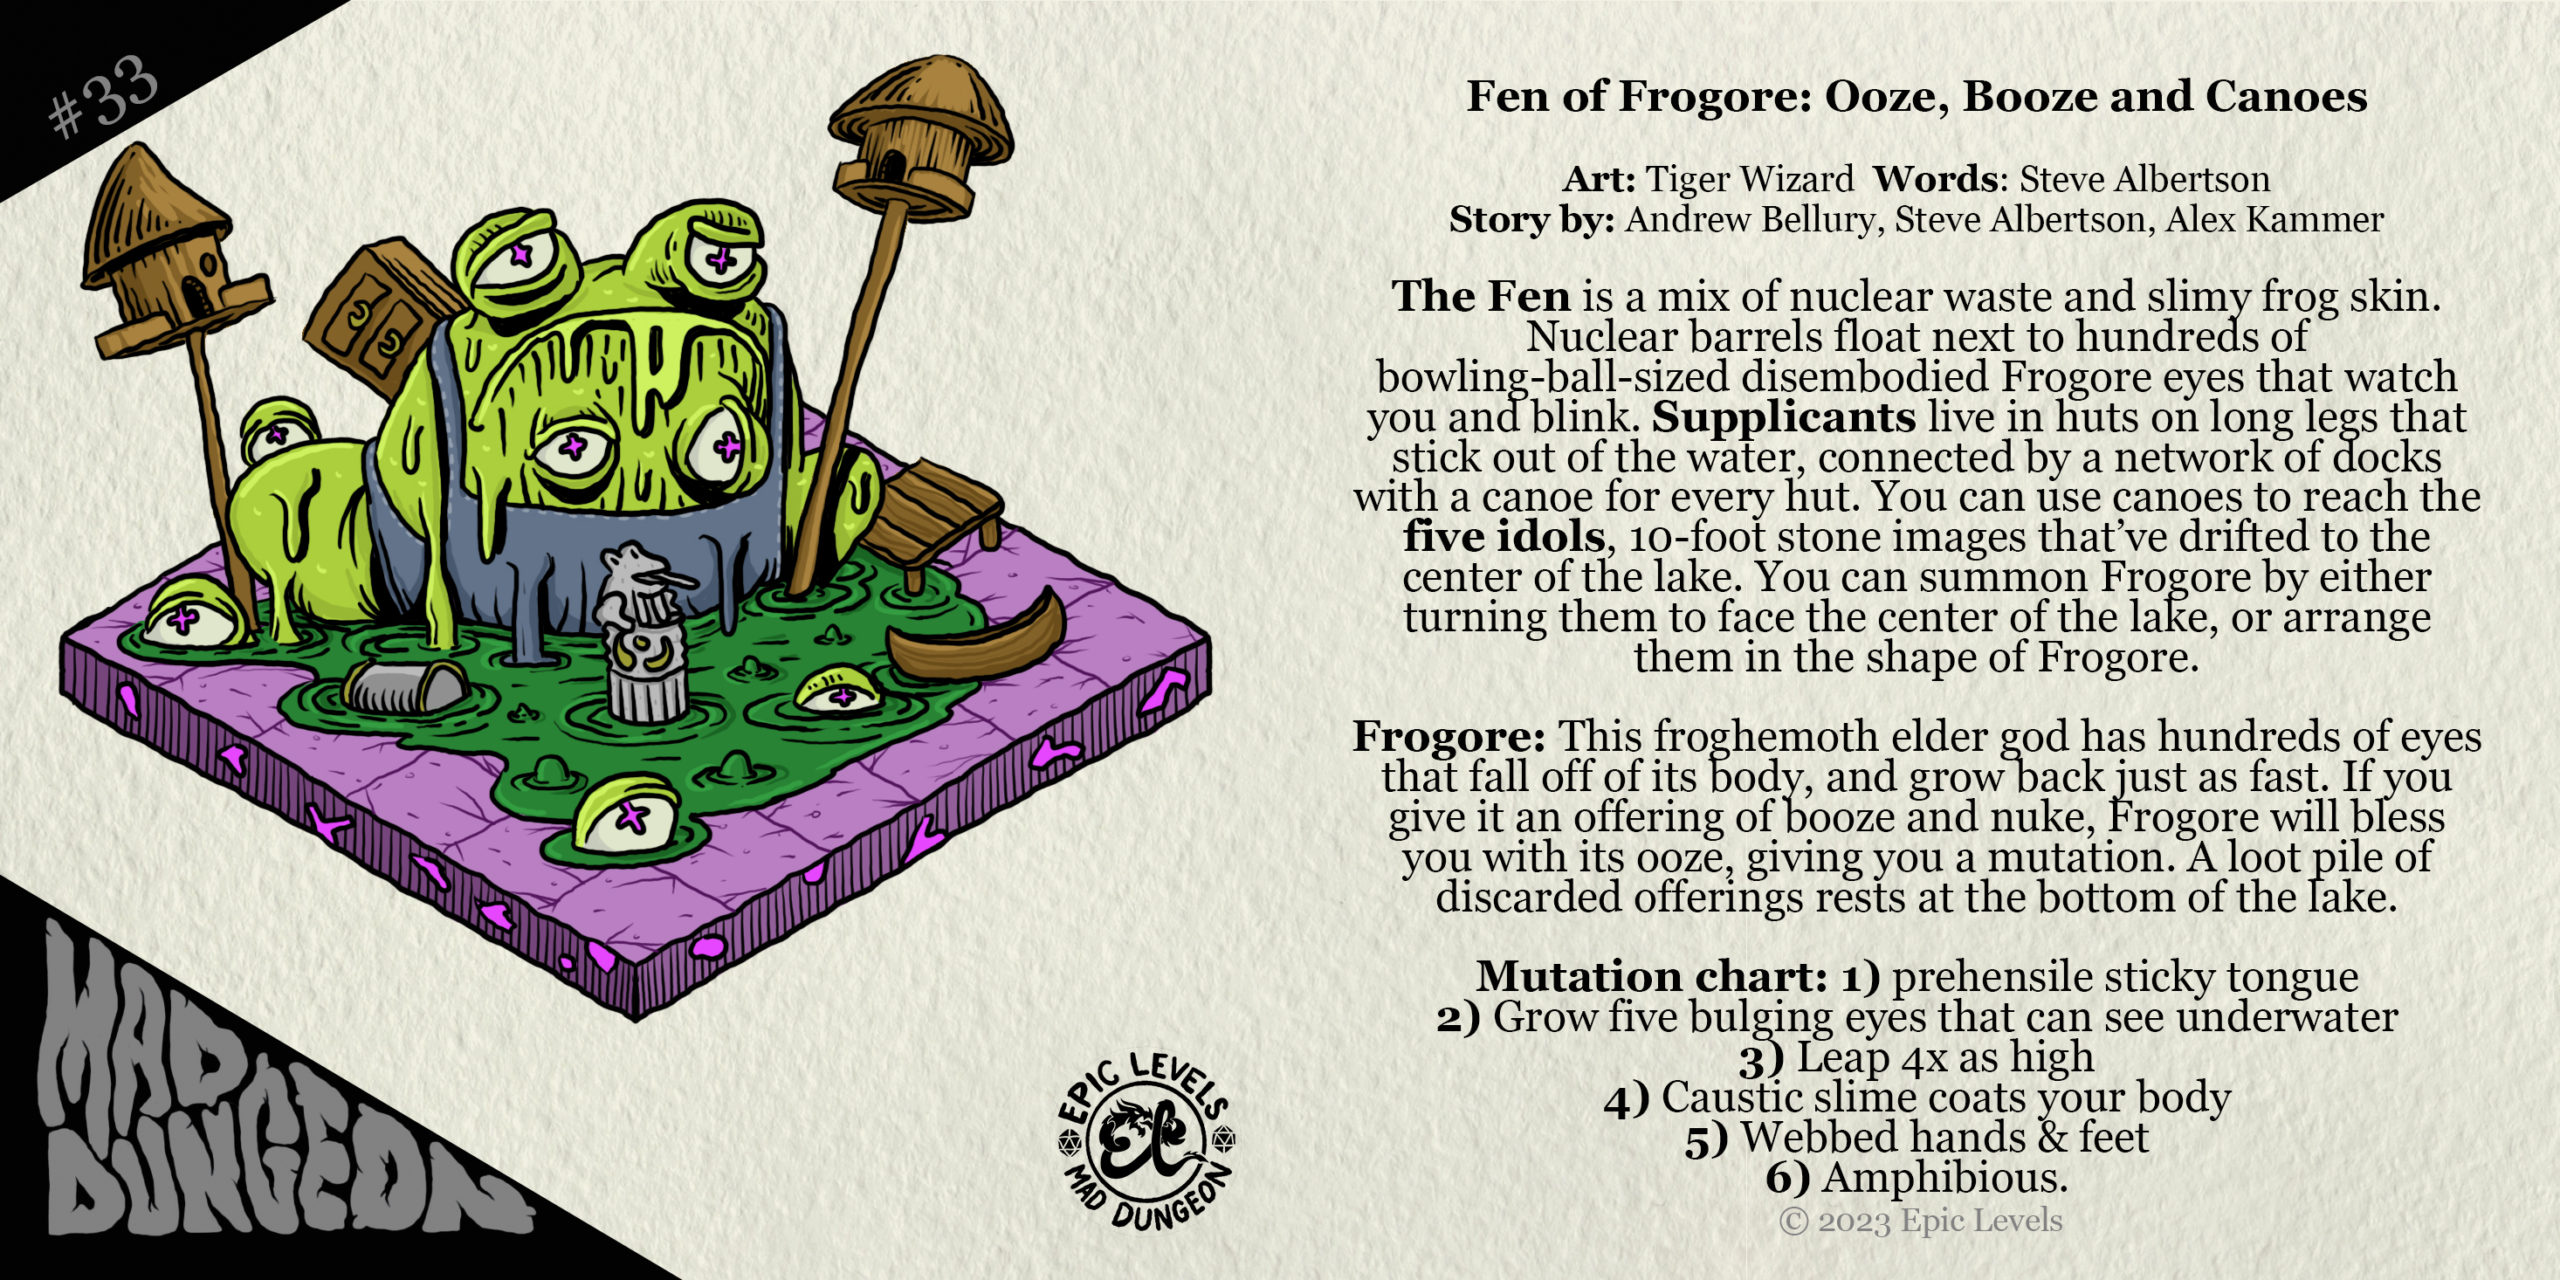 MD 233 Fen of Frogore: Ooze, Booze and Canoes w/ Alex Kammer (Gamehole Con, Frog God Games, The End of Everything). Epic Levels Mad Dungeon podcast